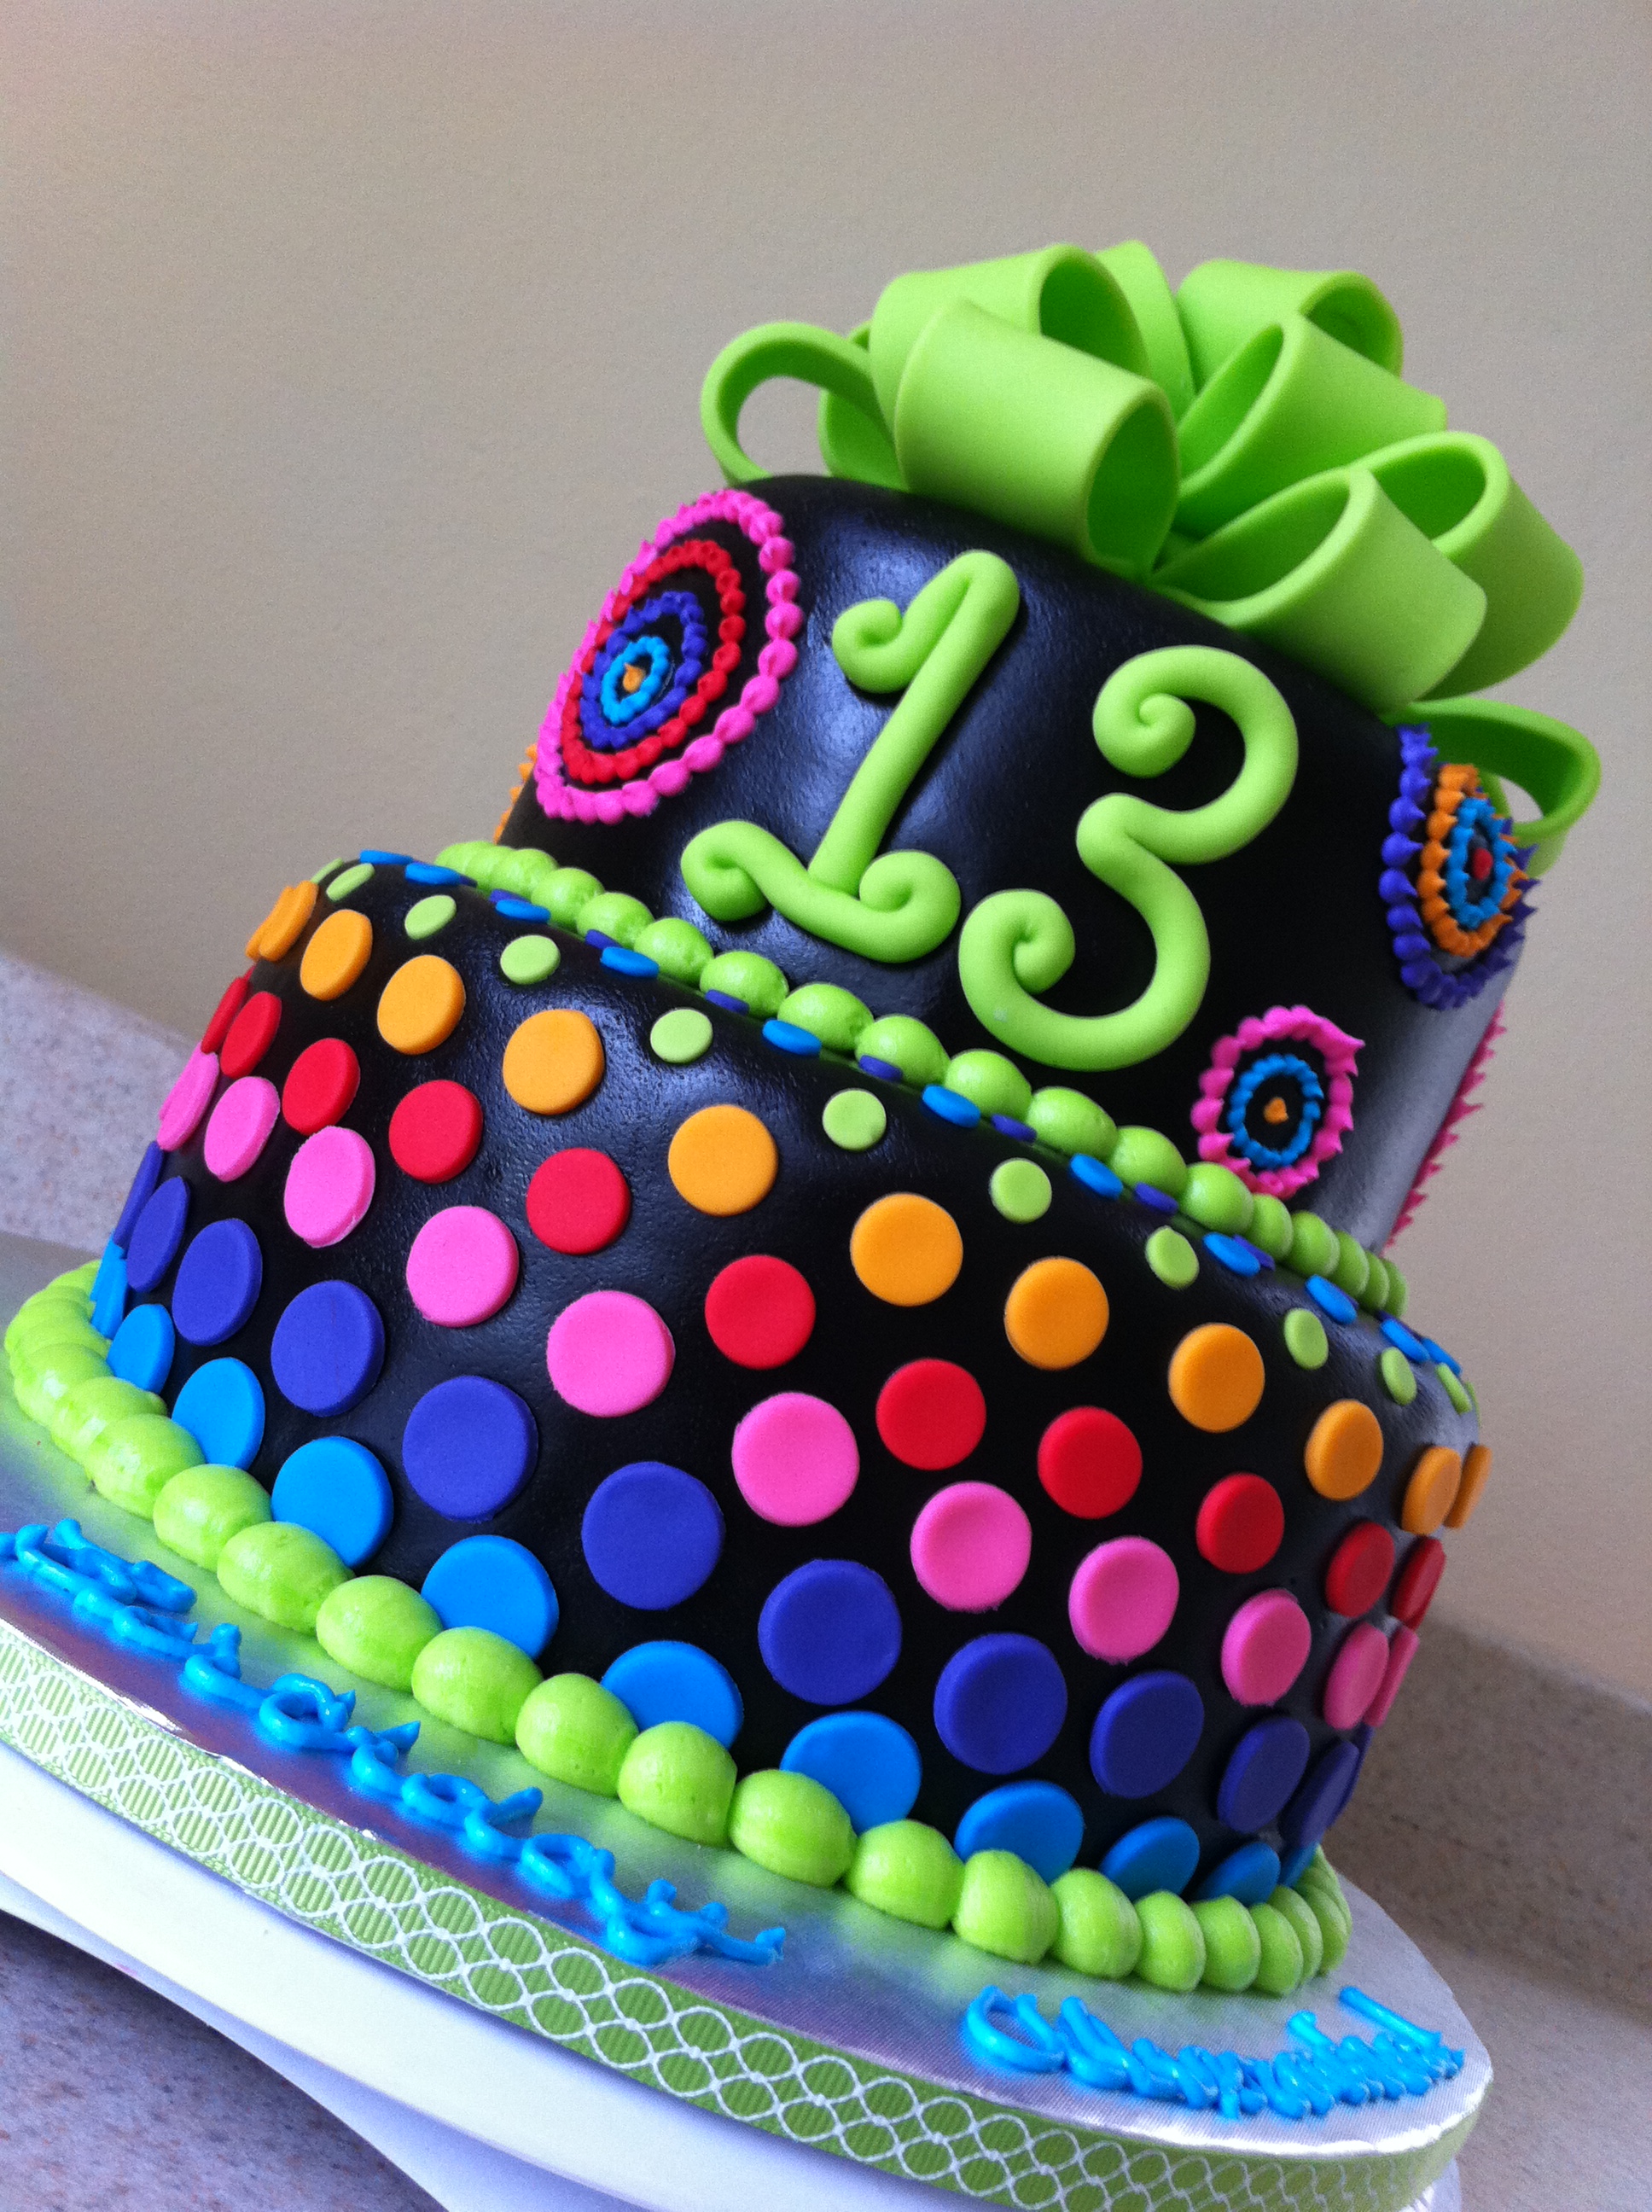 13th-birthday-cakes-5-most-suited-styles-for-teen-boys-and-girls